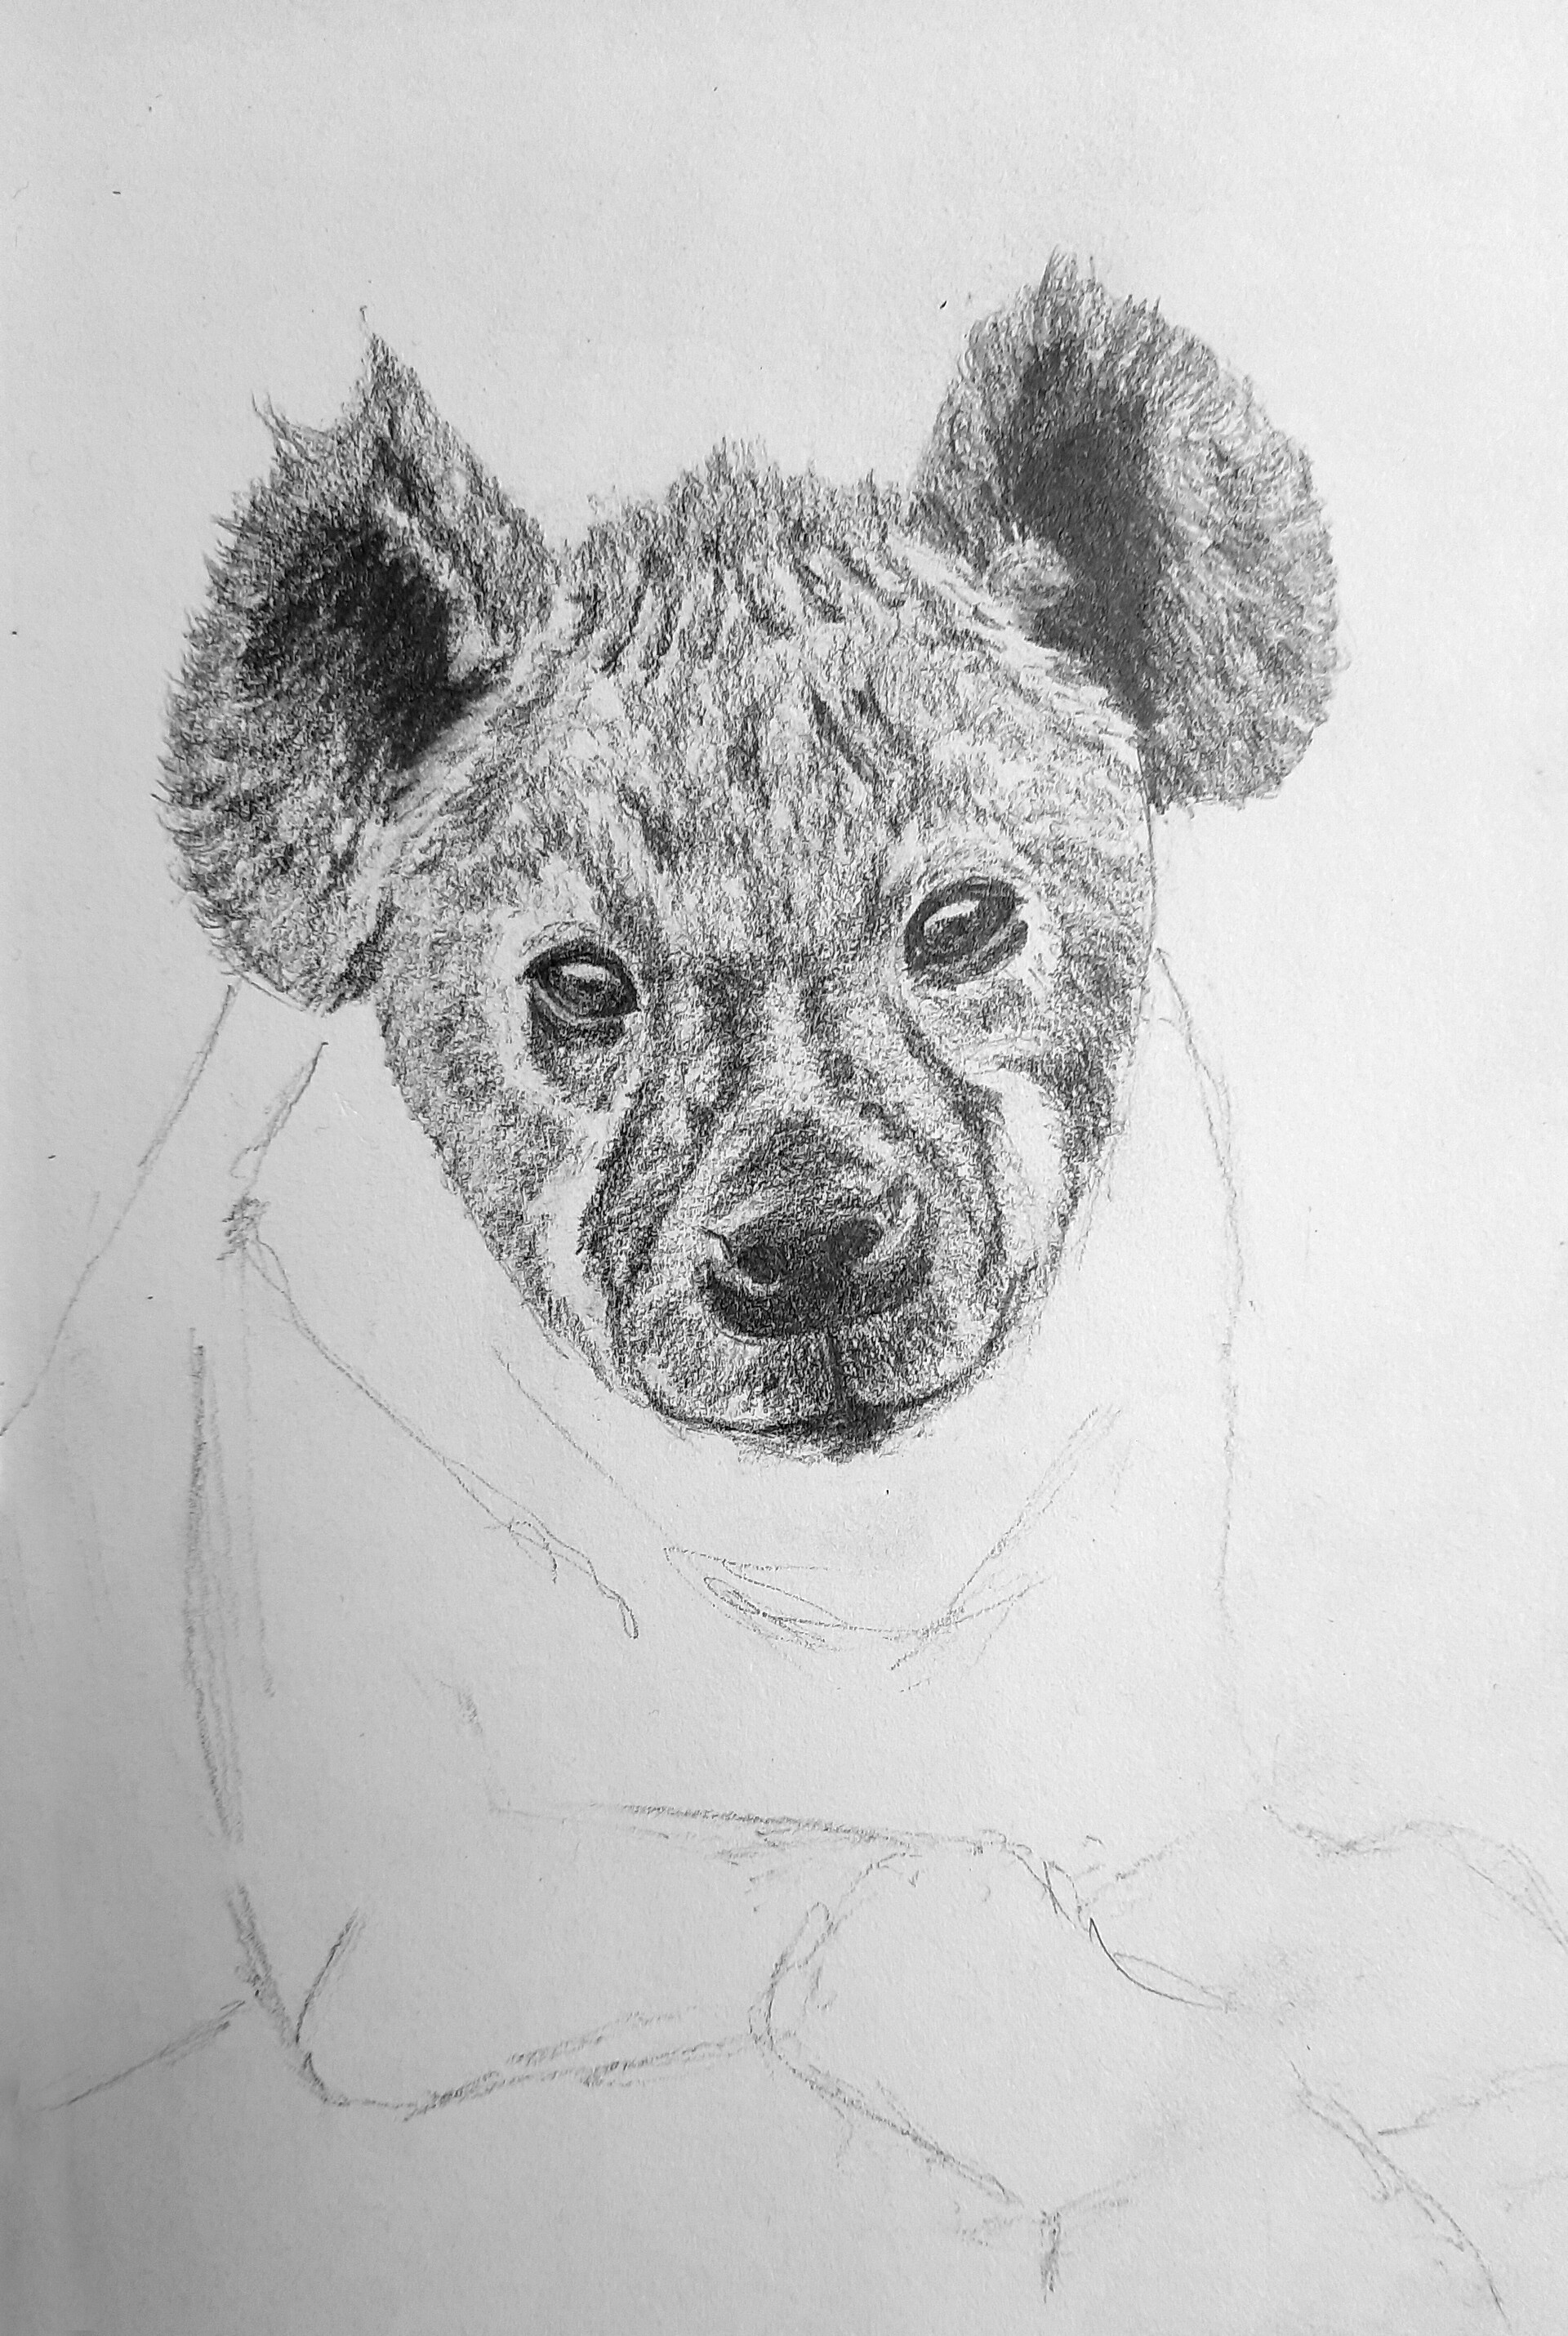 Hyena Sketch Gifts  Merchandise for Sale  Redbubble